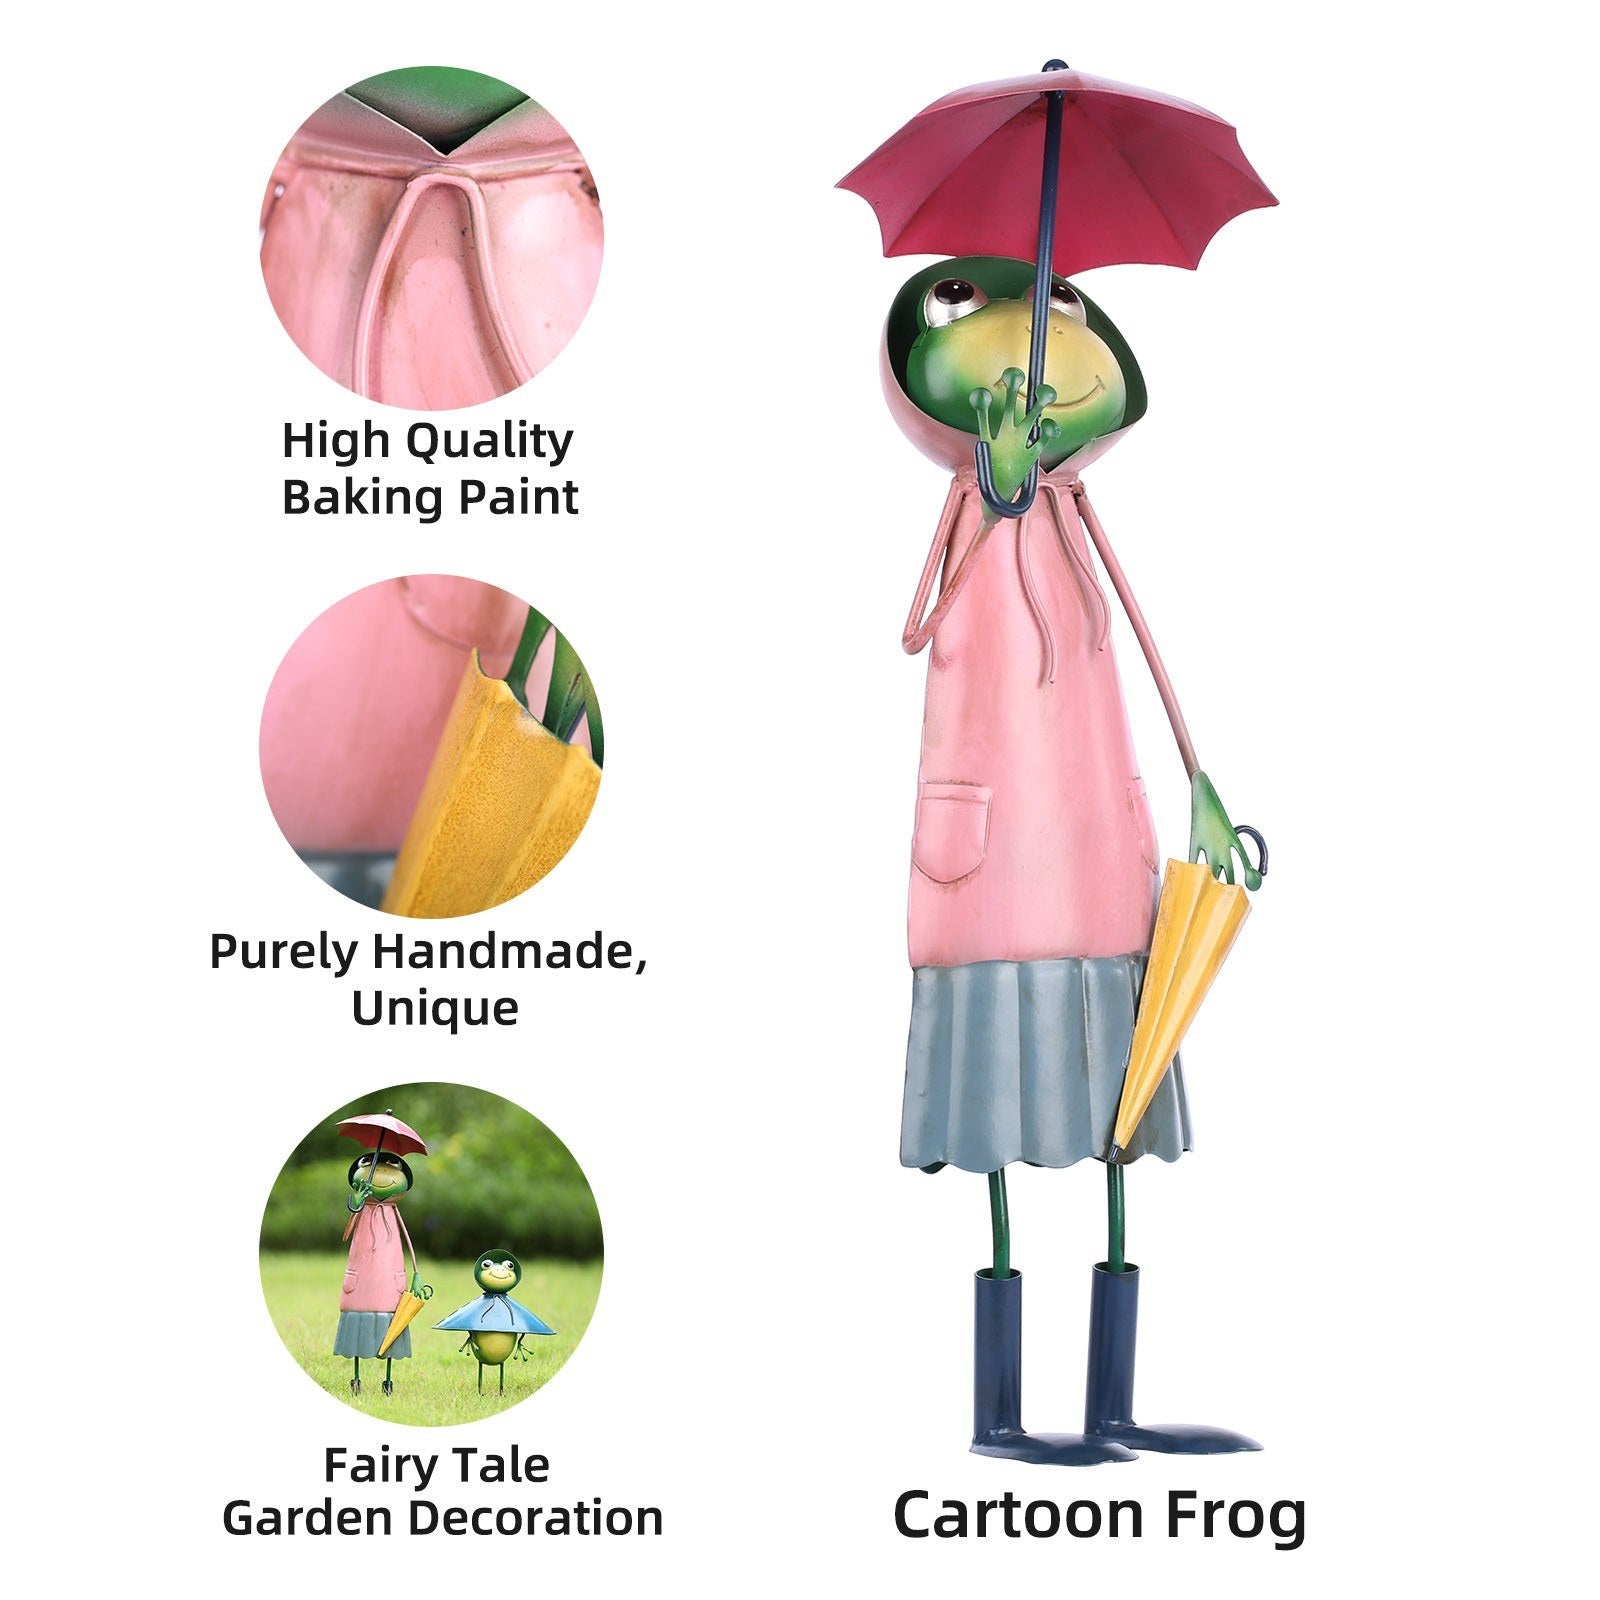 Gardener frogs are really cute as figurine - ornament, maybe as gift!